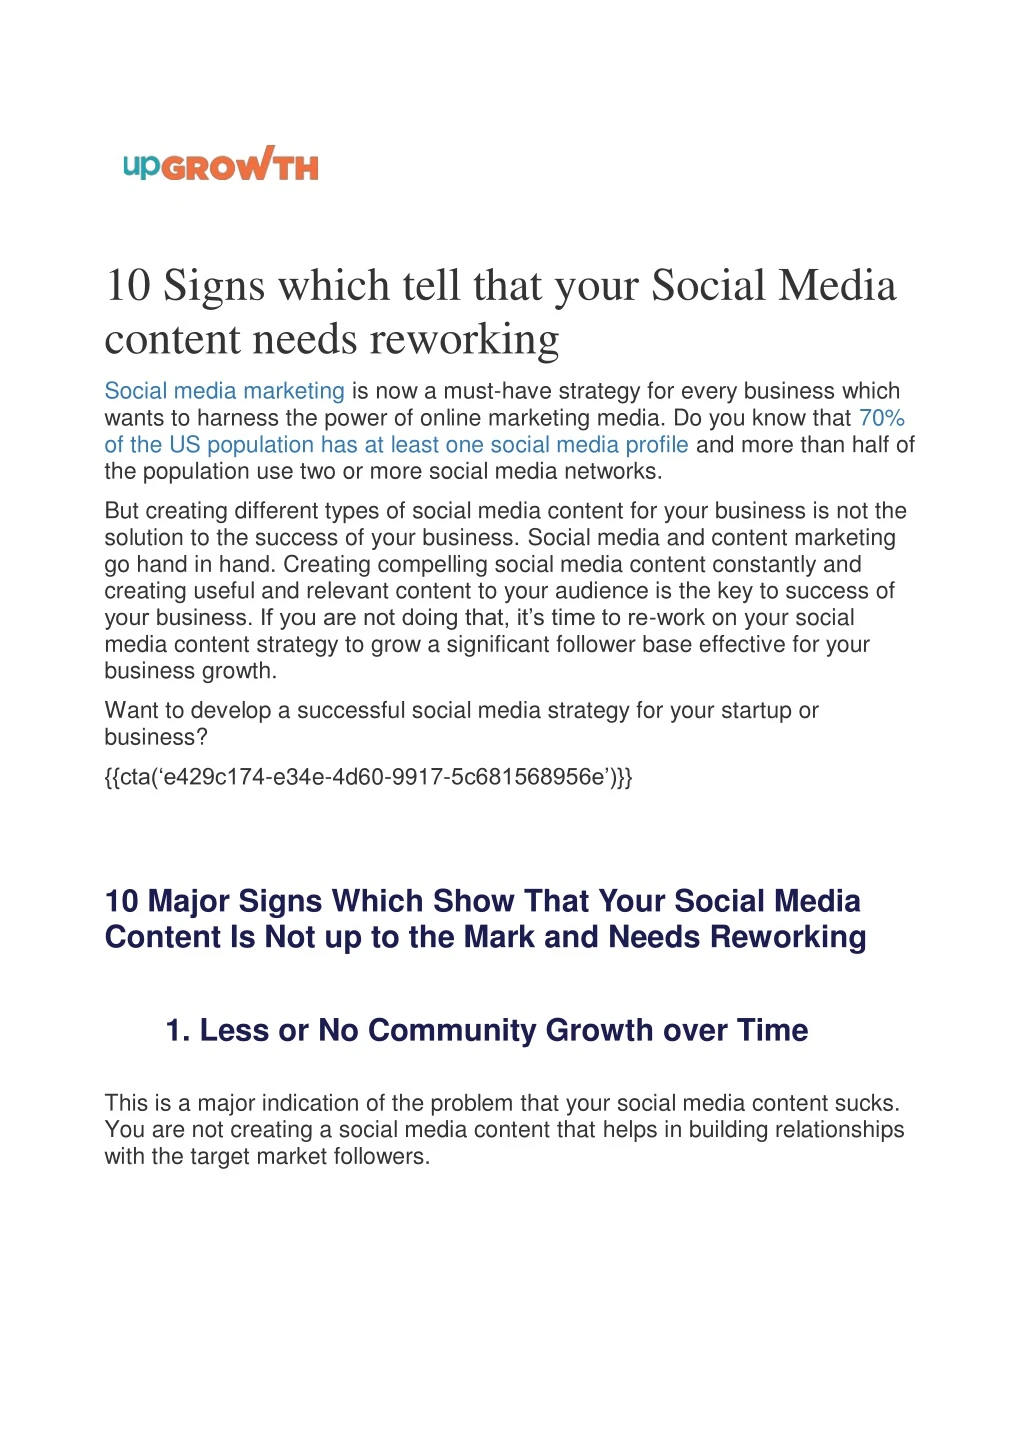 10 signs which tell that your social media